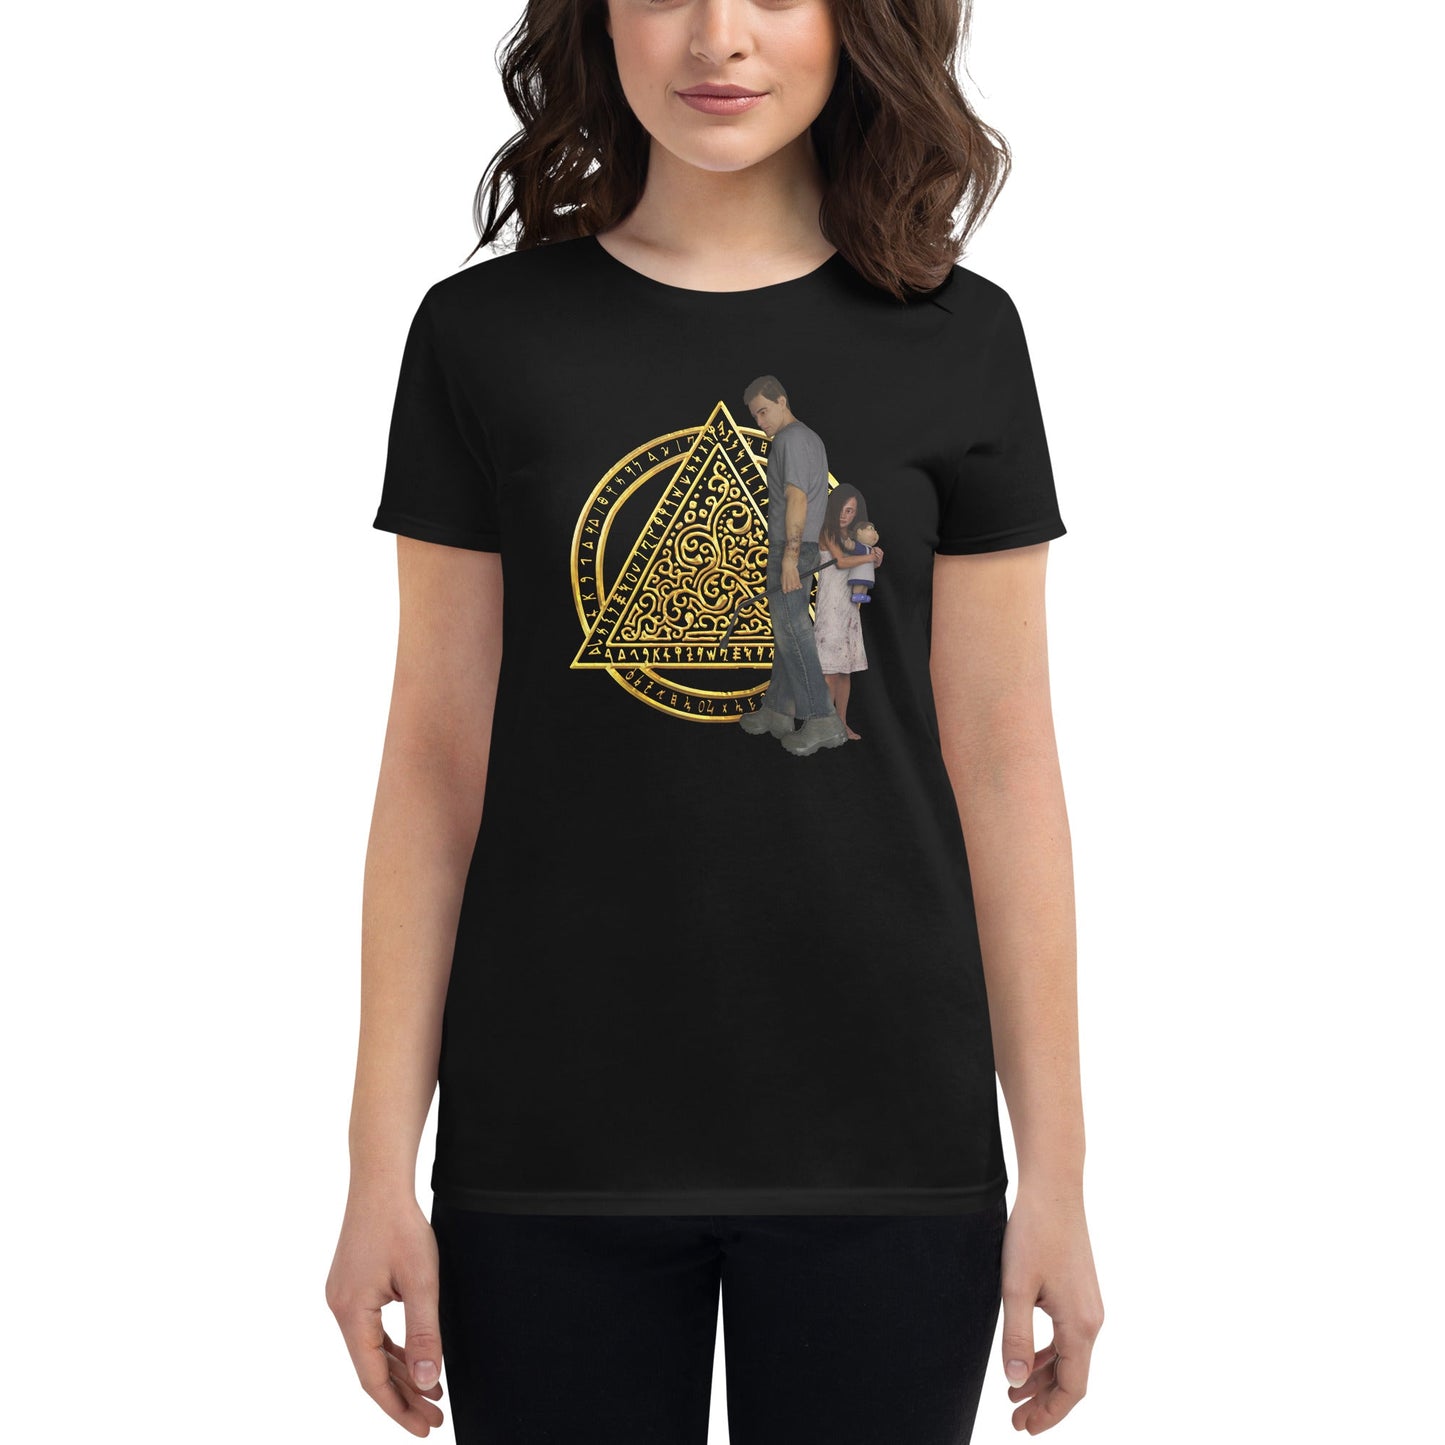 Women's Short Sleeve T-shirt | The Last Rite | Daniel and Bethany - Spectral Ink Shop - Shirts & Tops -8213733_4902